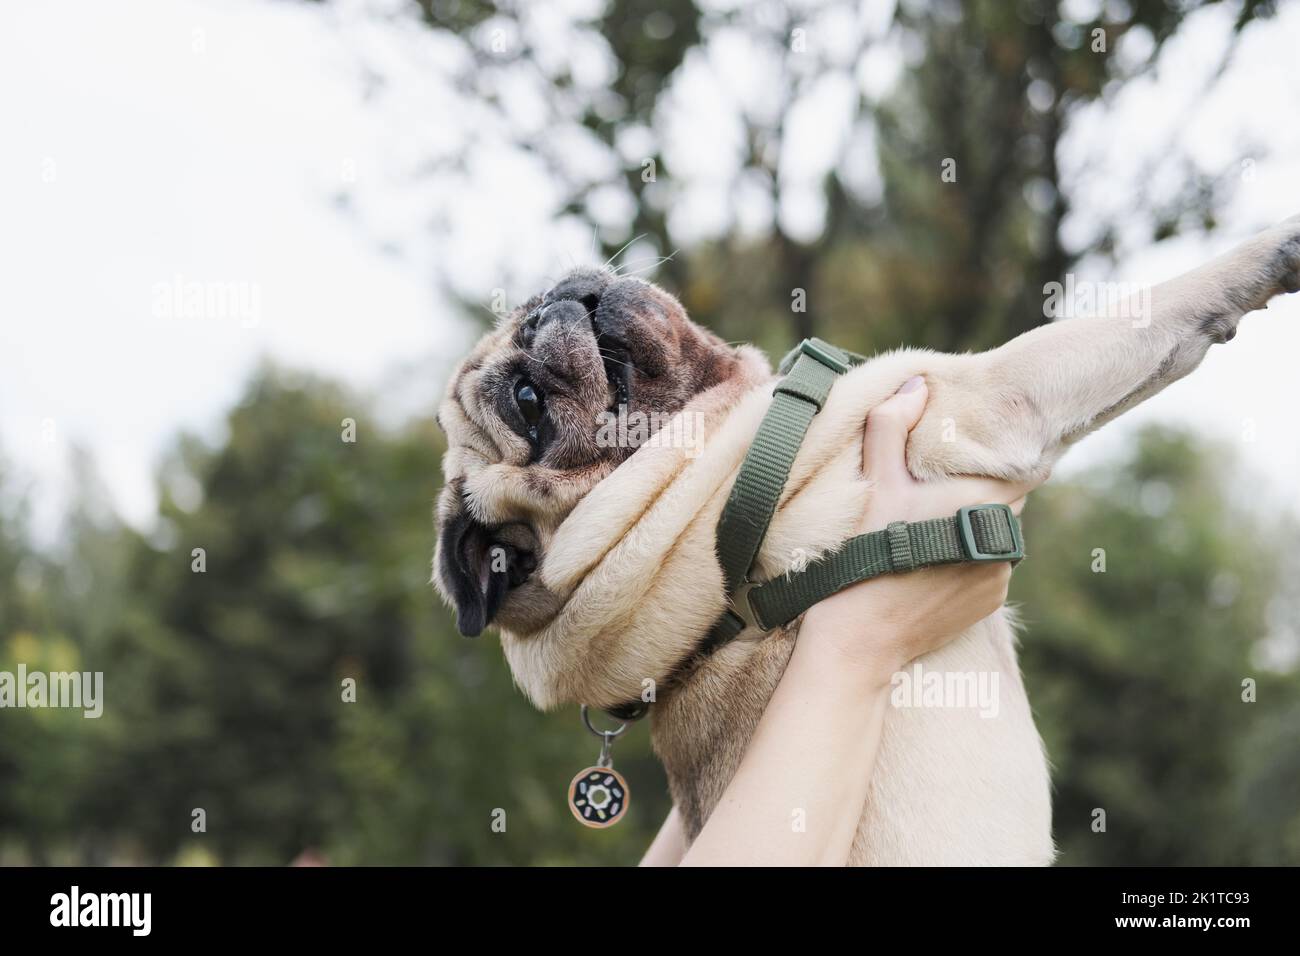 Funny pug held in human hands. Cute pug dog portrait, happiness and cuteness Stock Photo